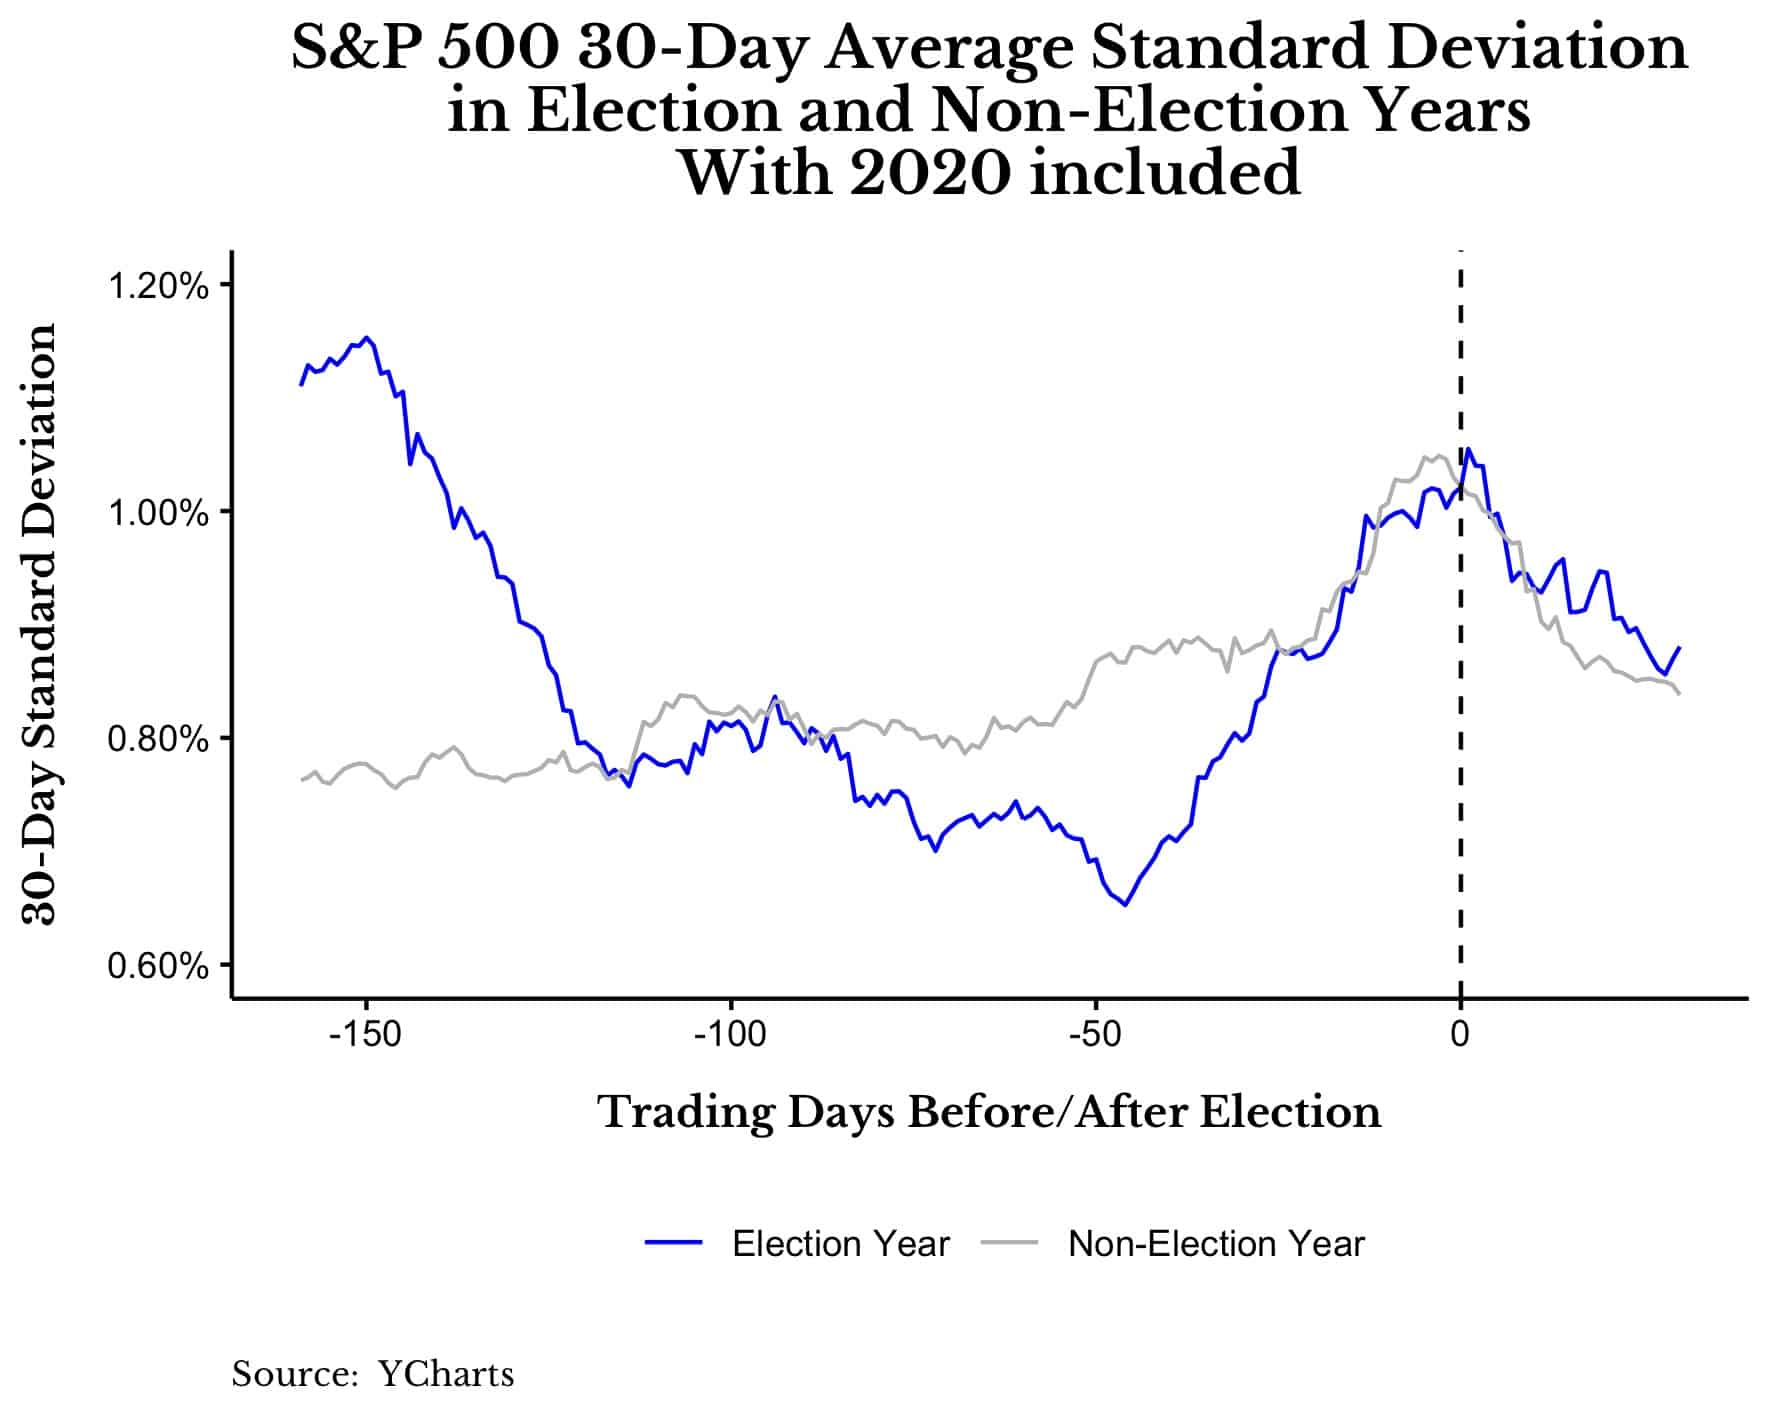 S&P 500 30-day standard deviation in election and non-election years (with 2020 included)